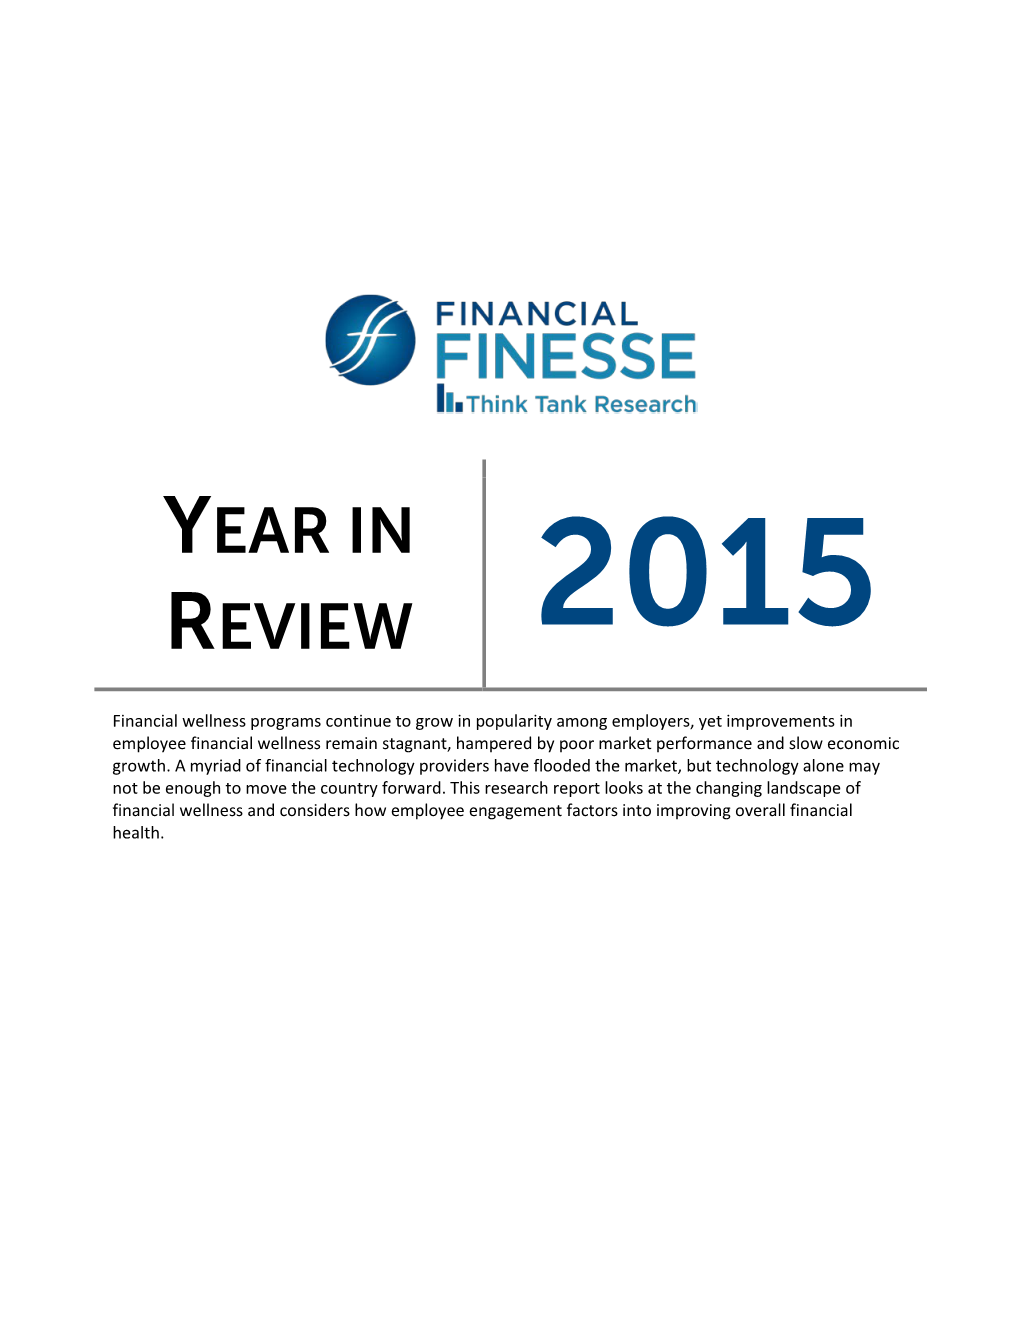 Financial Finesse 2015 Year in Review